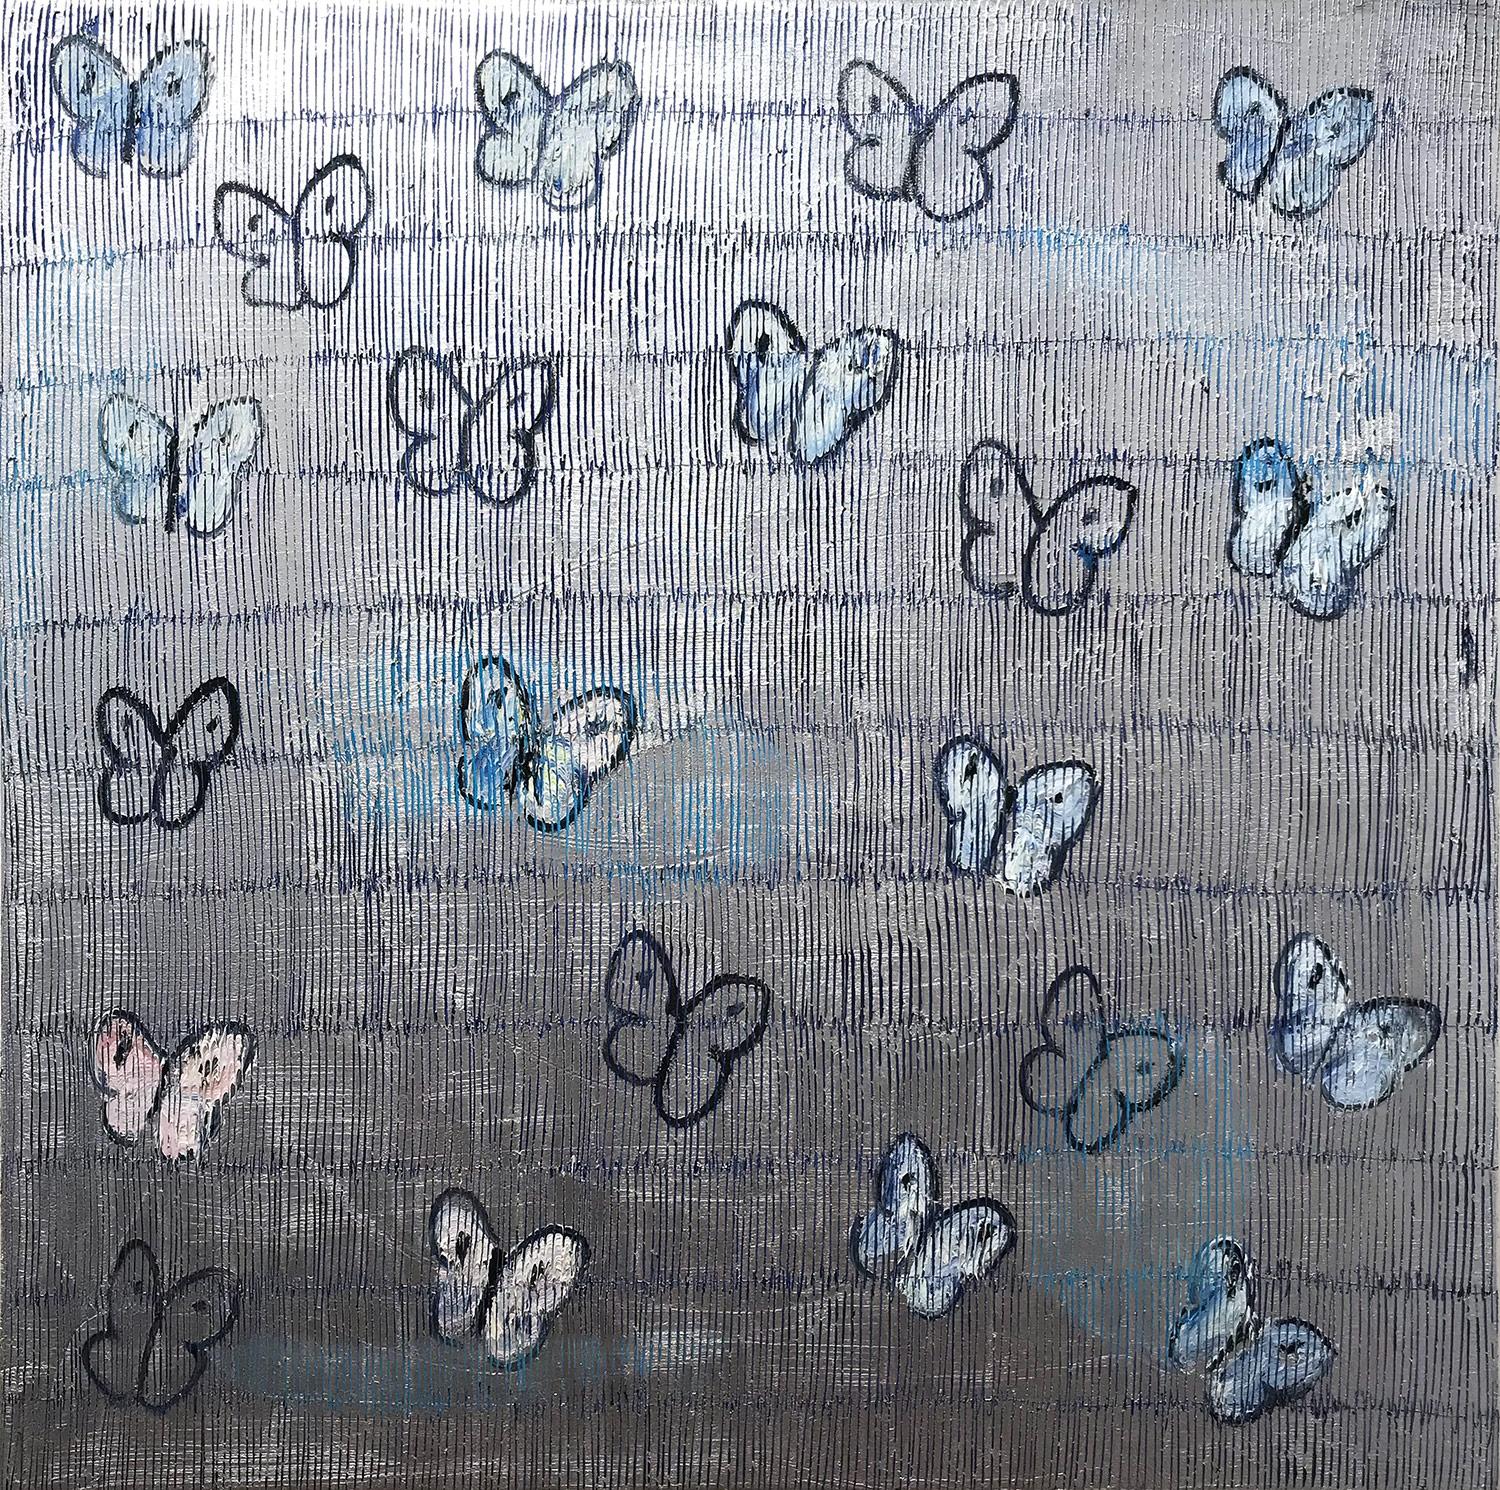 "Silverado" White and Blue Butterflies with Silver Background Painting on Canvas